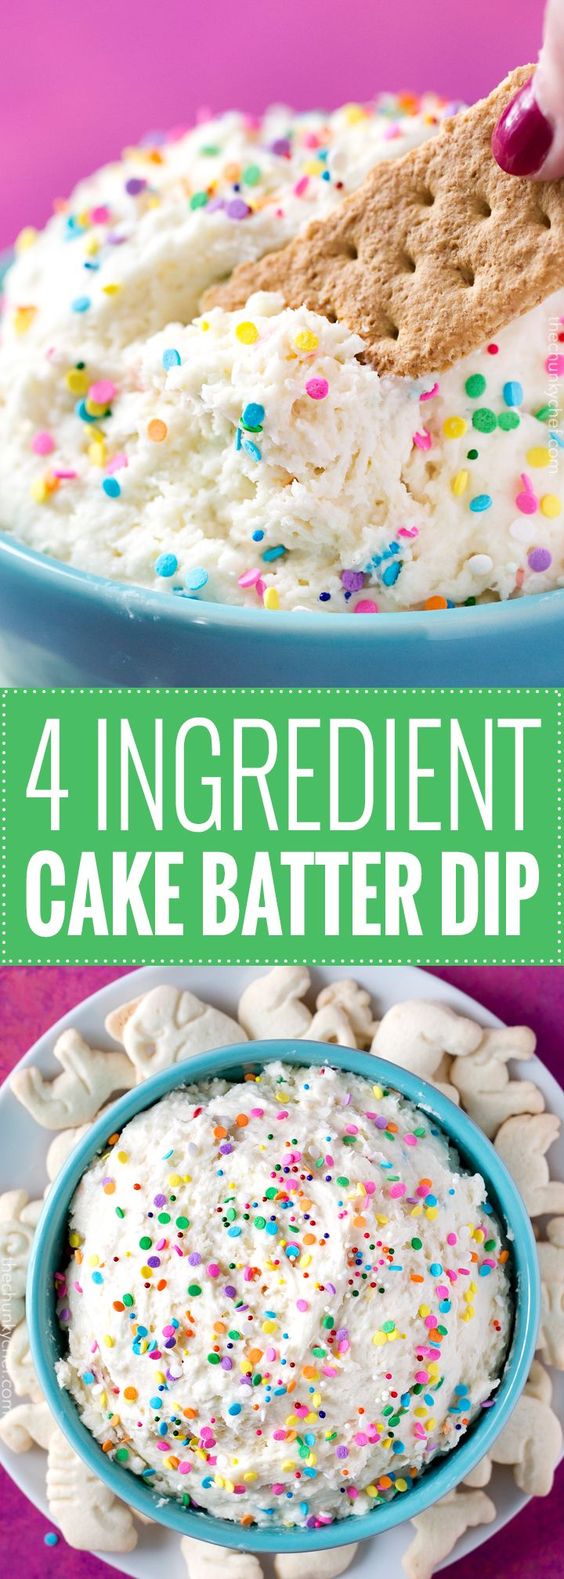 Everything you love about cake batter, in an easy no-bake, 4 ingredient dip.  Studded with great funfetti flavors, this dip is fabulous for any occasion!